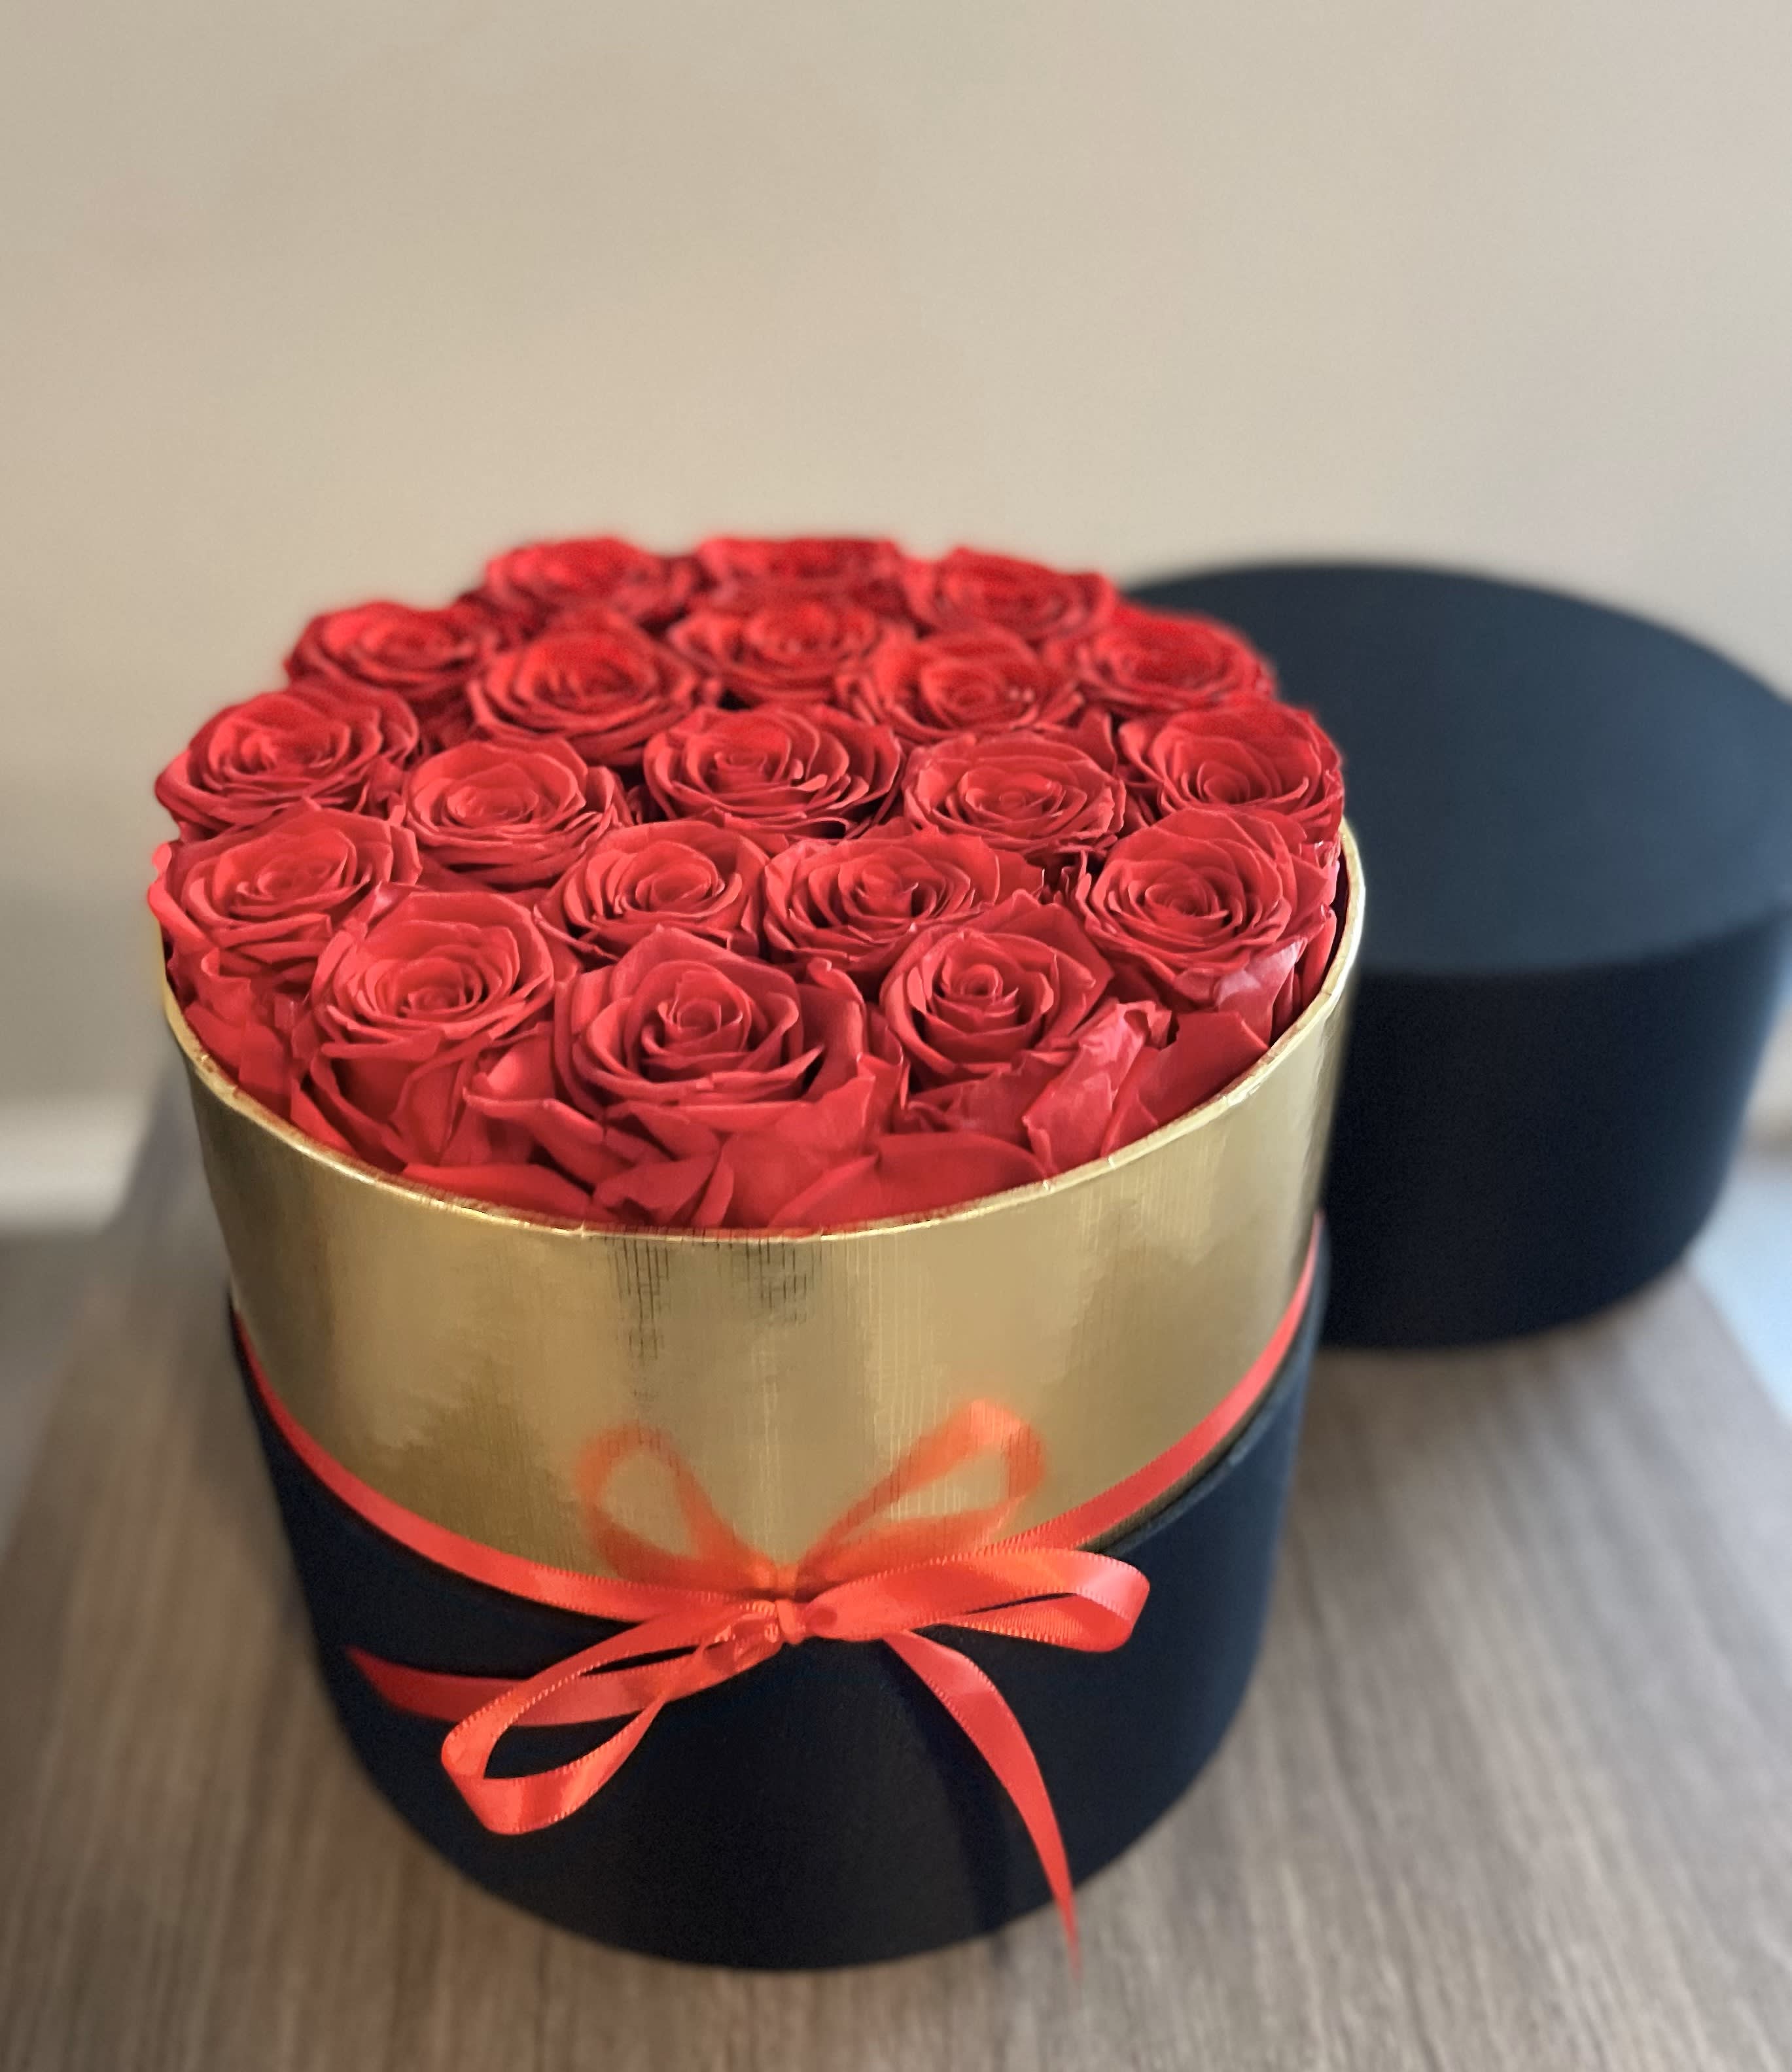  Preserved  20 Red Roses Large Cylinder Box - Stunning cylinder shaped box that contains 20 real preserved red roses that last two years or longer 